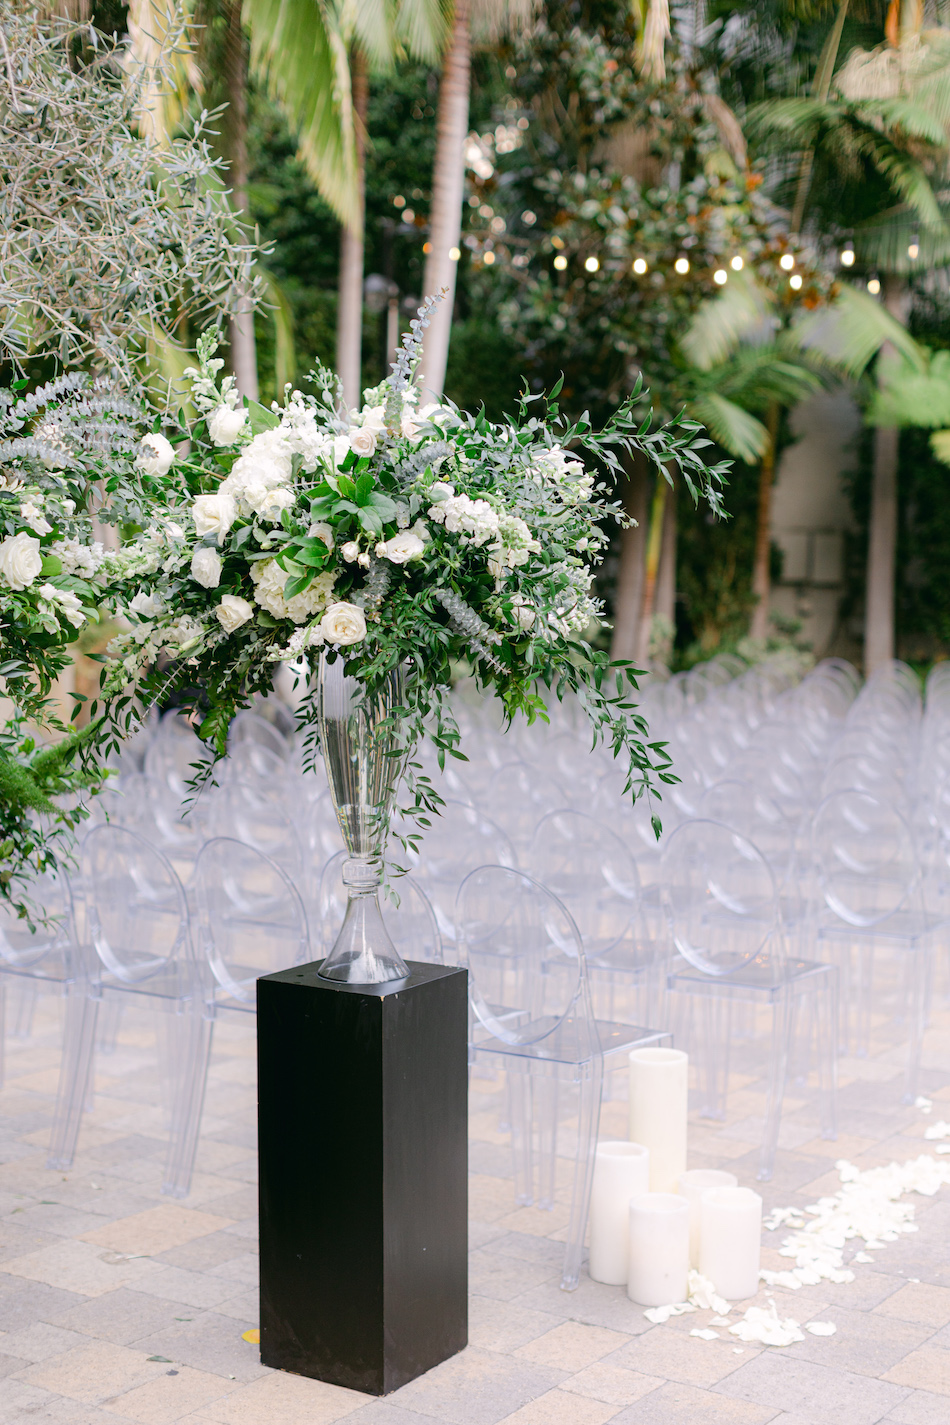 elevated florals, white ceremony florals, towering florals, floral design, florist, wedding florist, wedding flowers, orange county weddings, orange county wedding florist, orange county florist, orange county floral design, flowers by cina